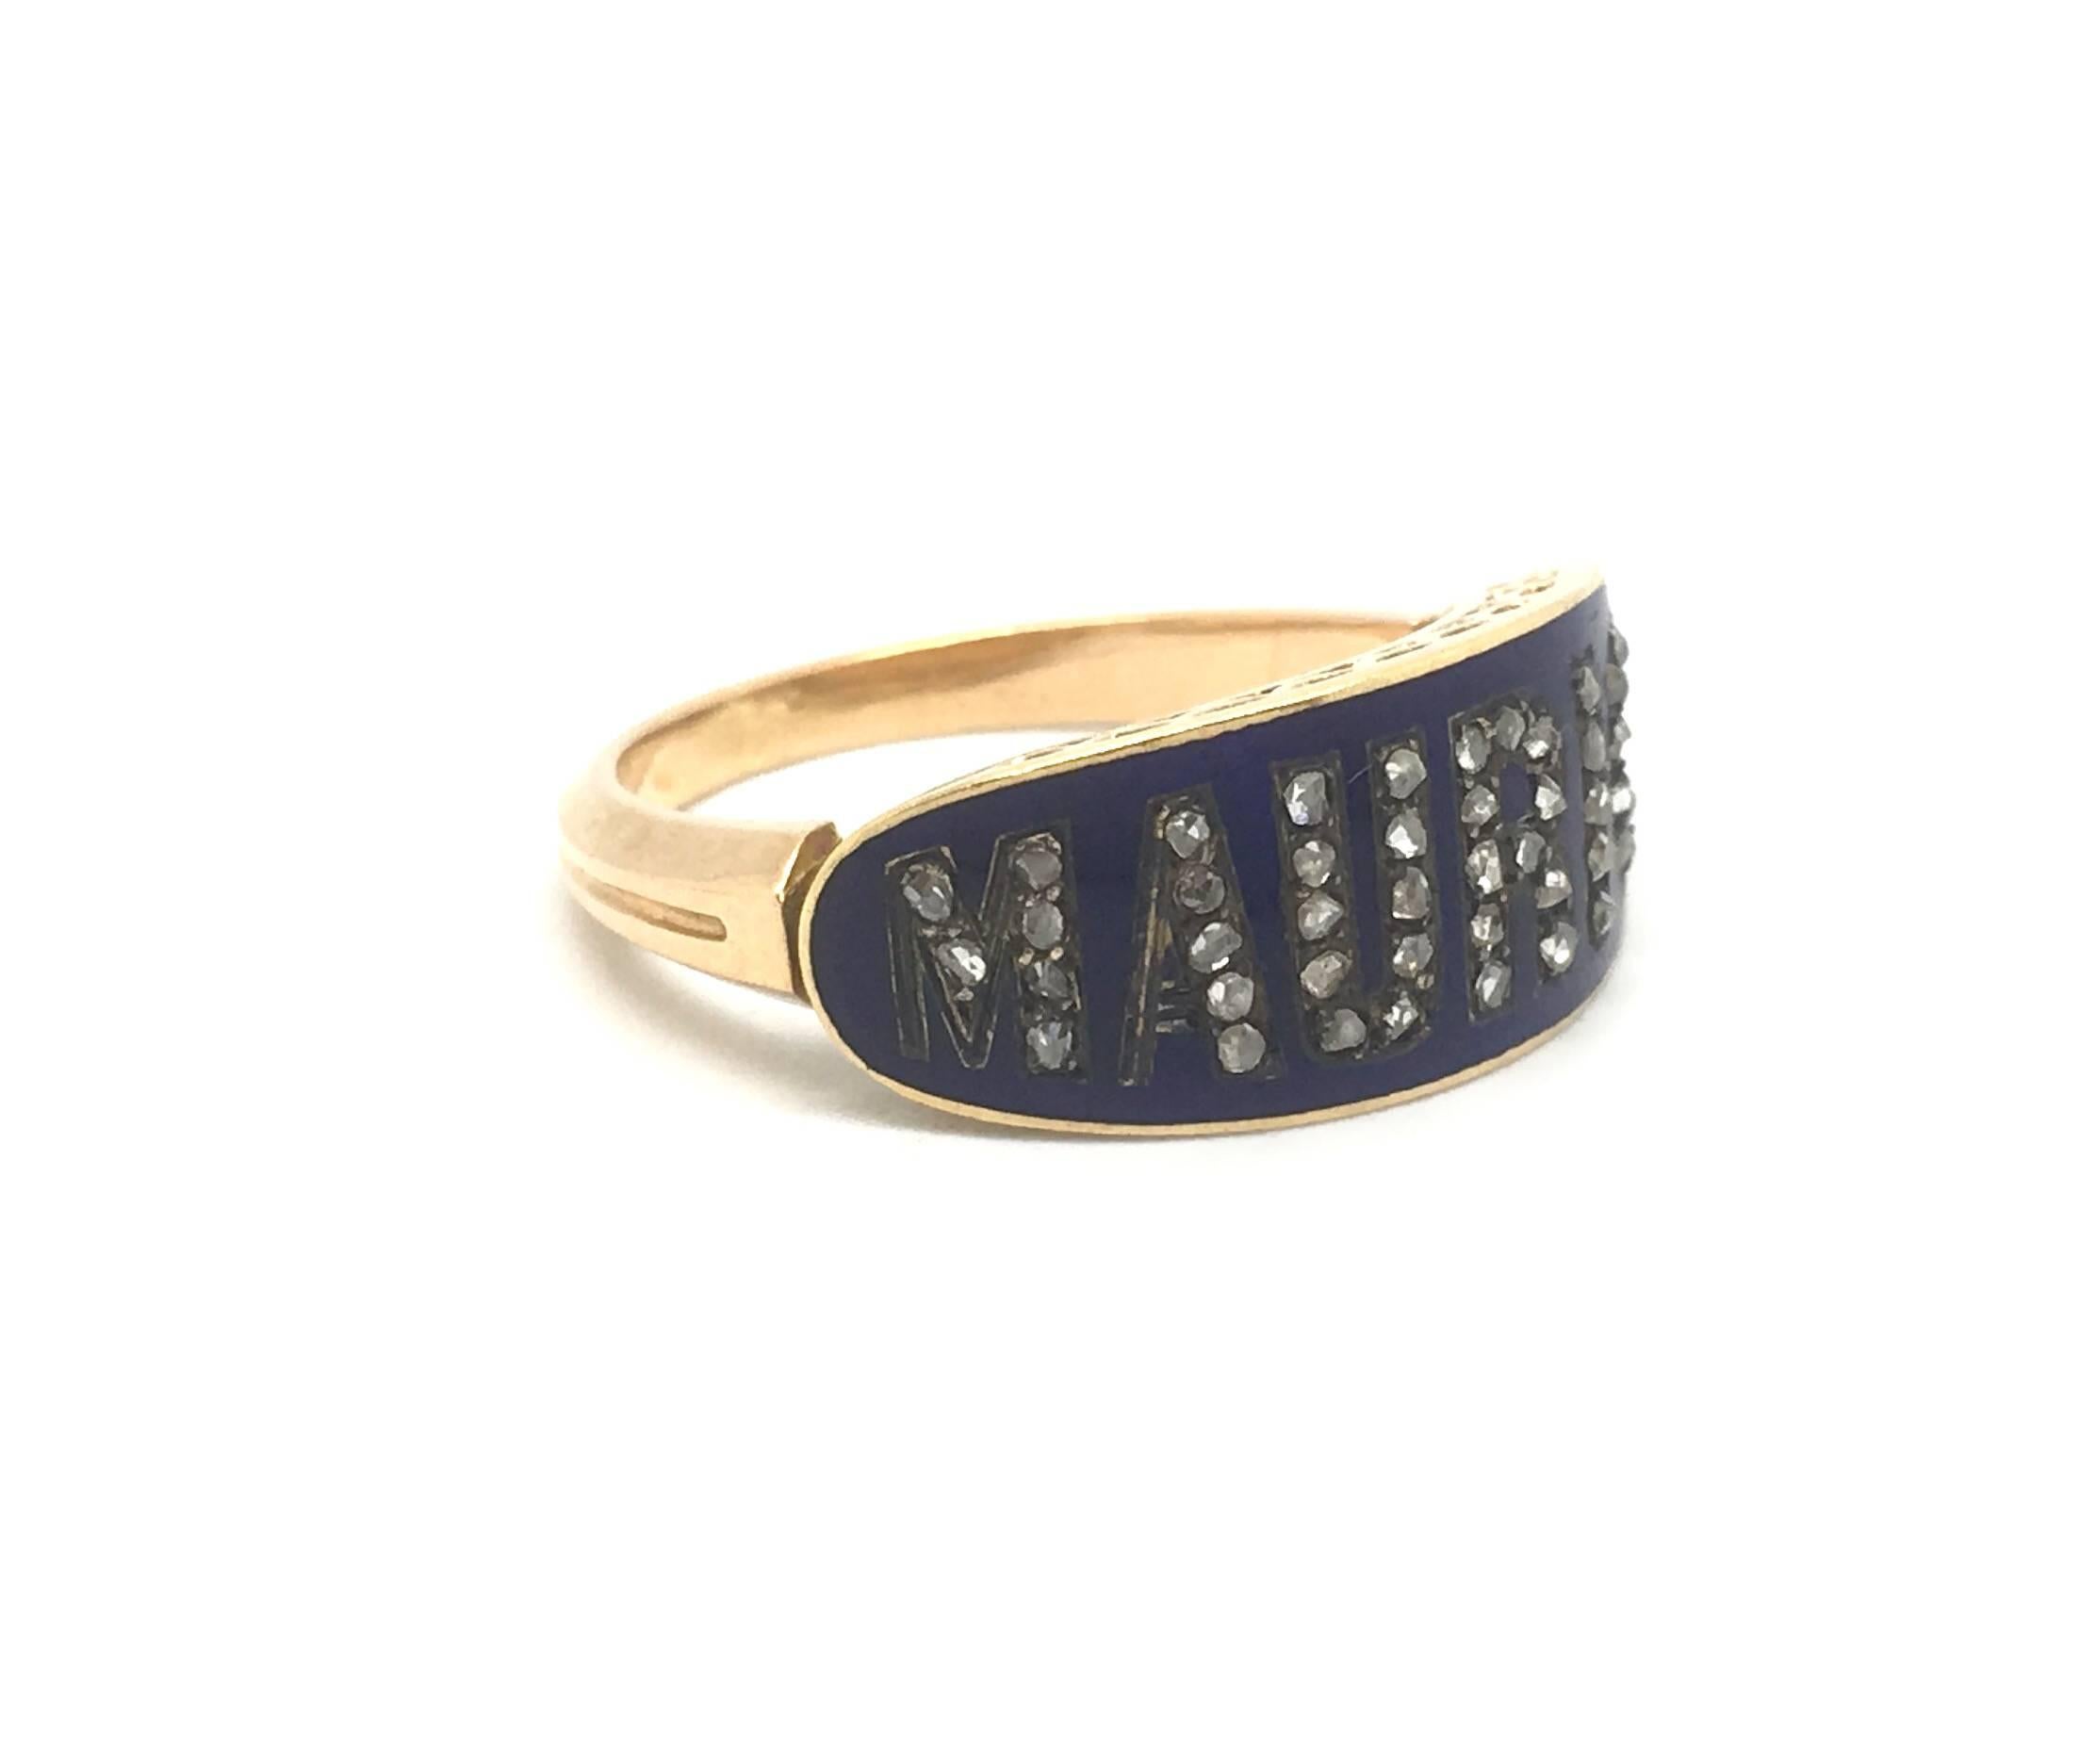 An exceptionally rare gold and enamel ring spelling out the name 